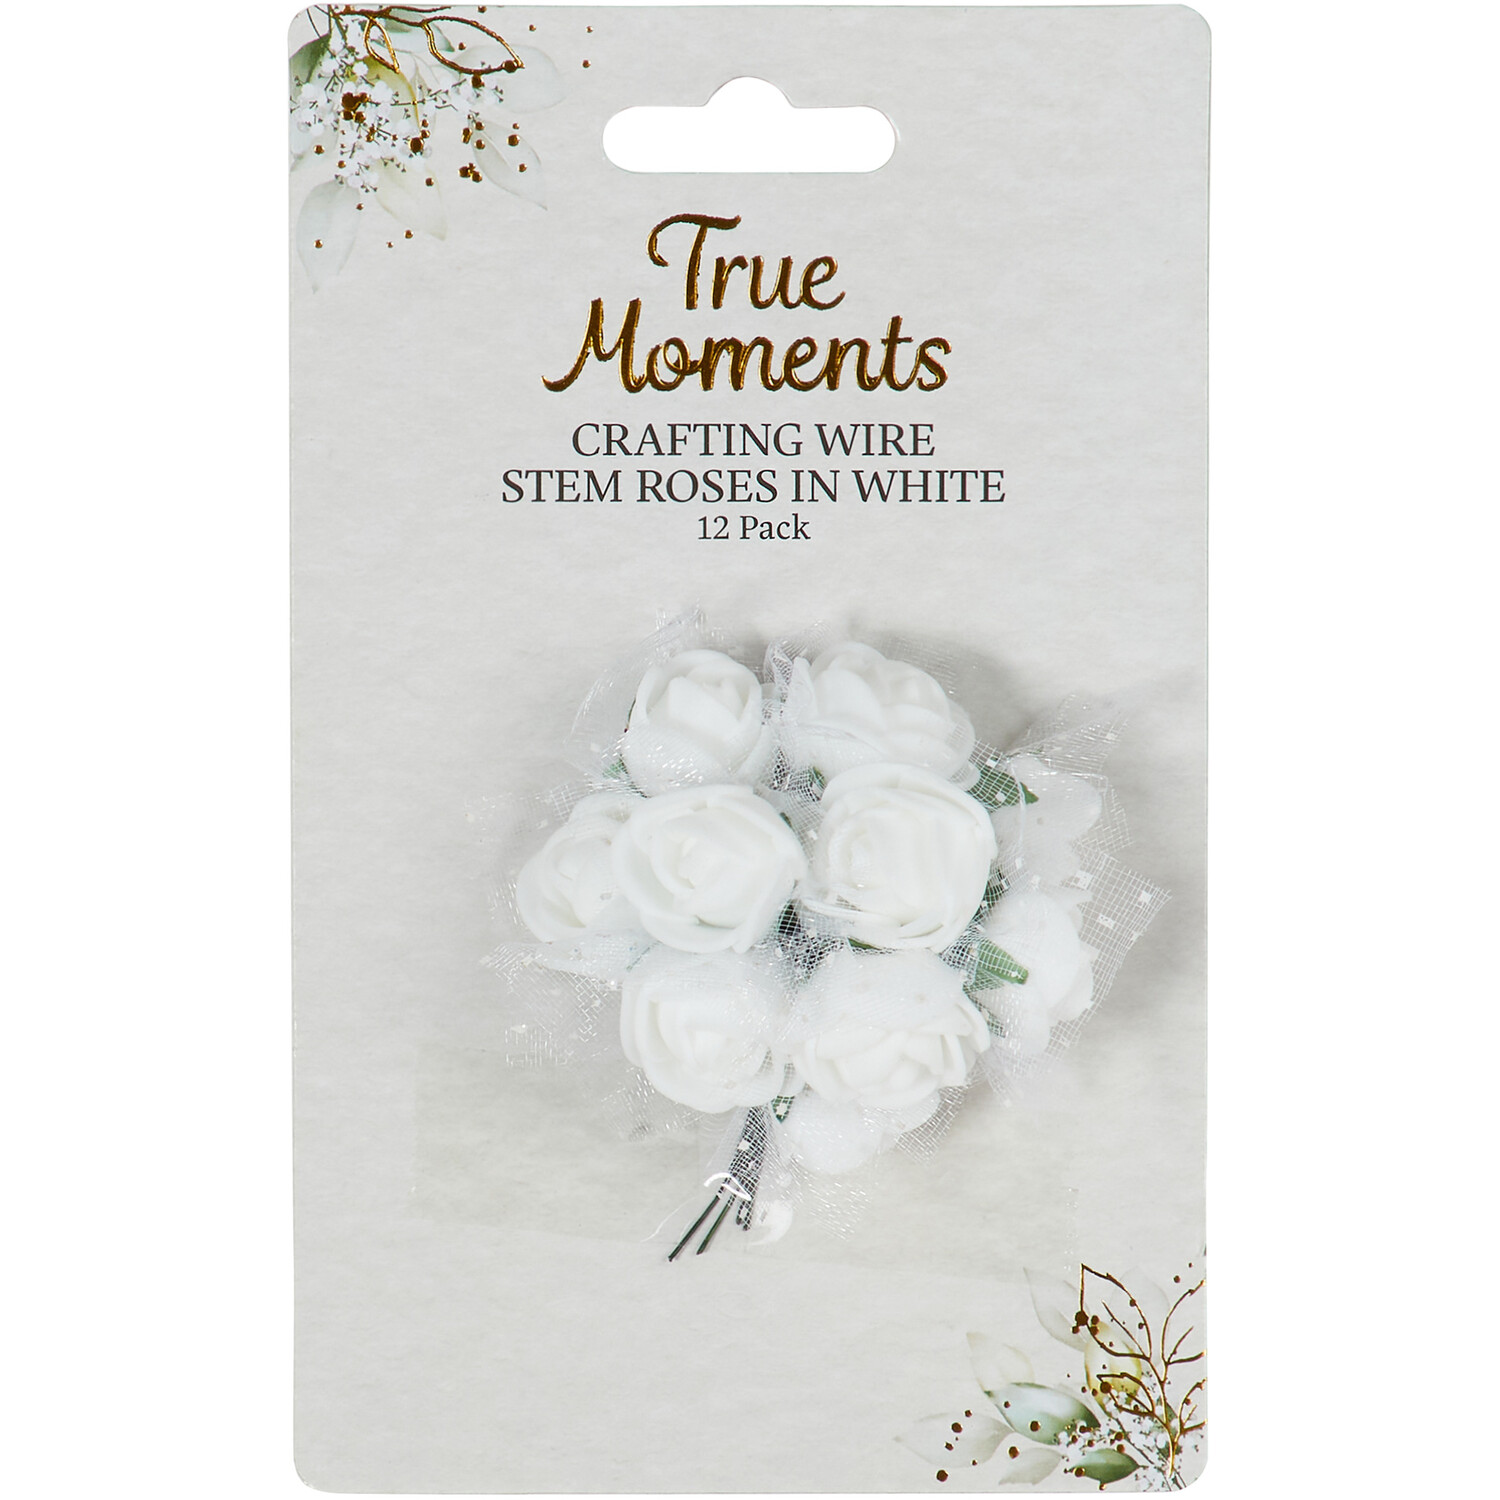 Crafting Wire Stem Roses in White Image 1